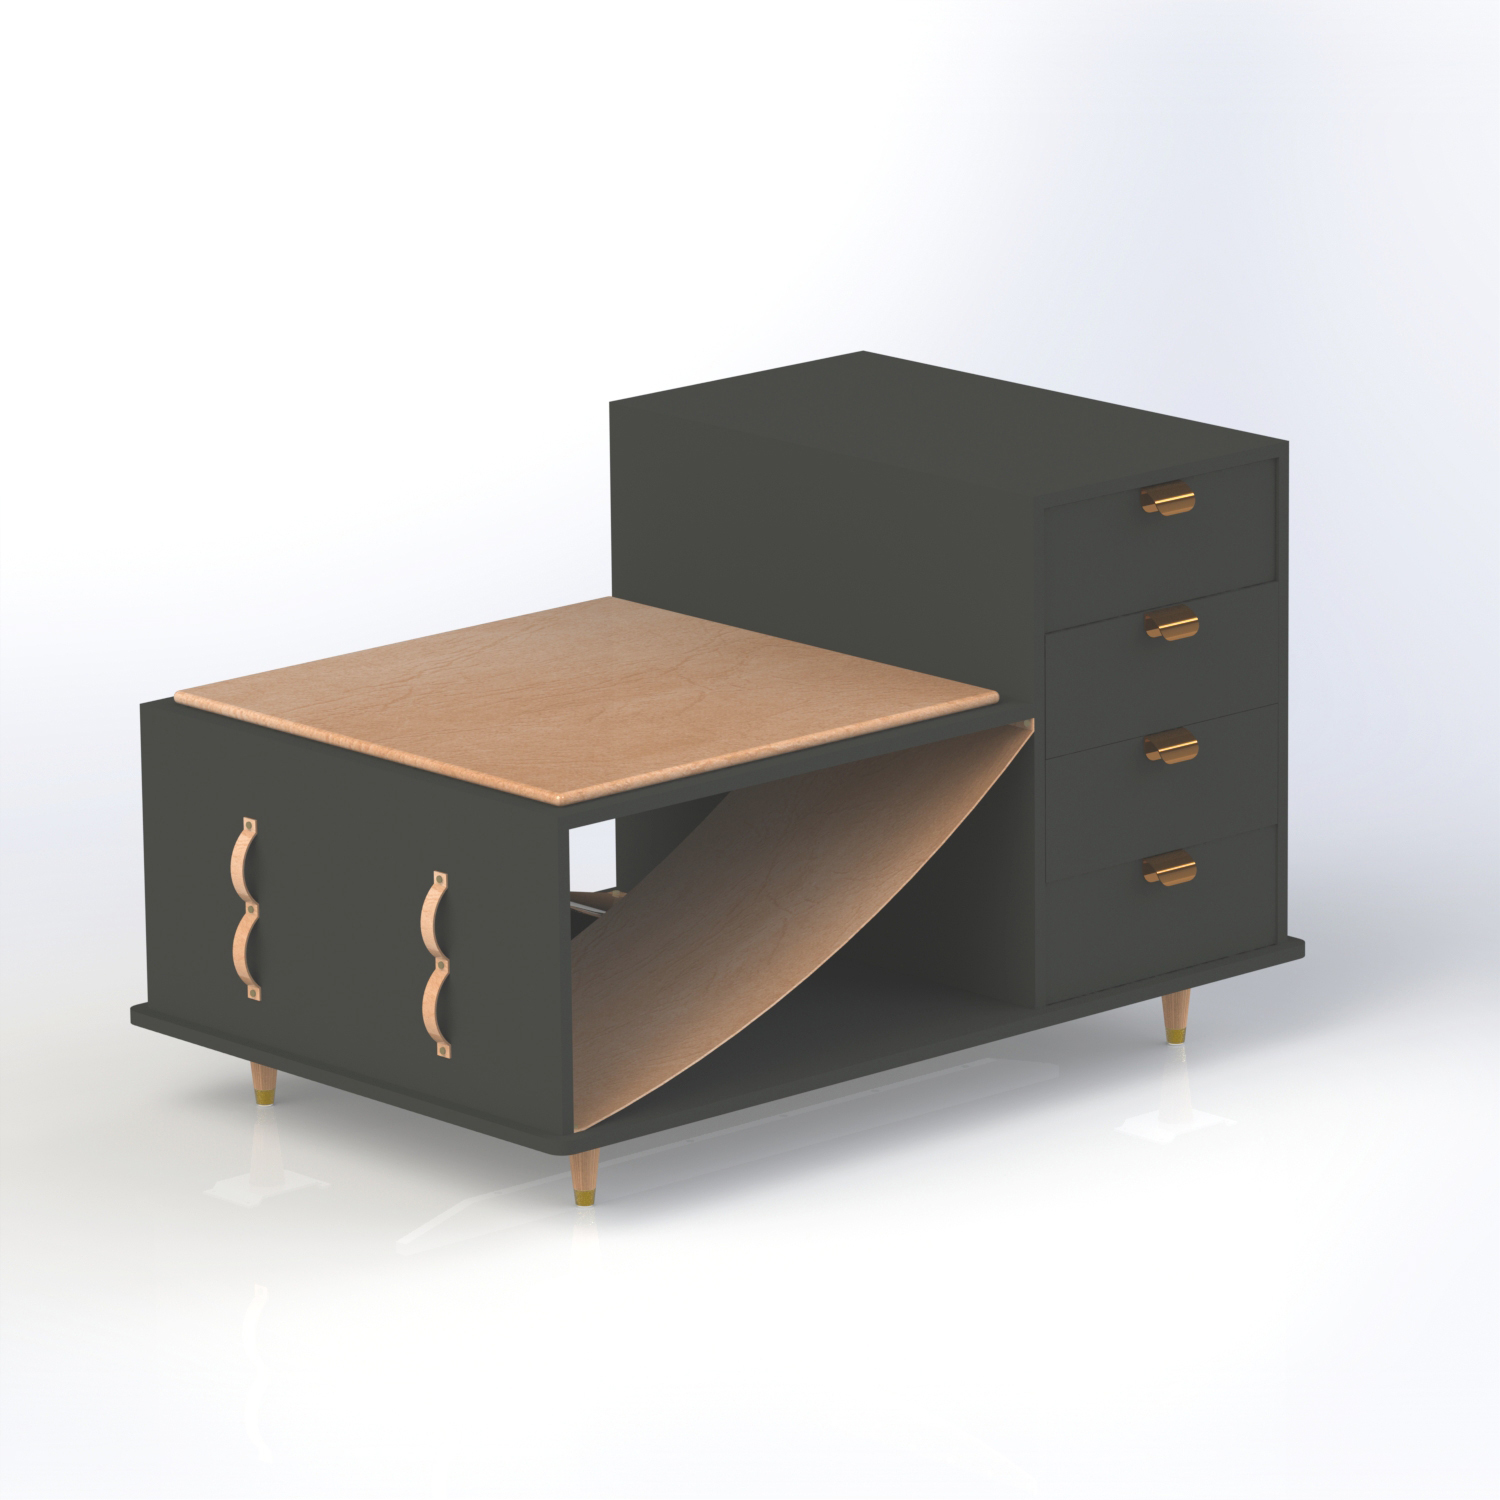 Combination furniture made in Solidworks, by Sebastian Galo